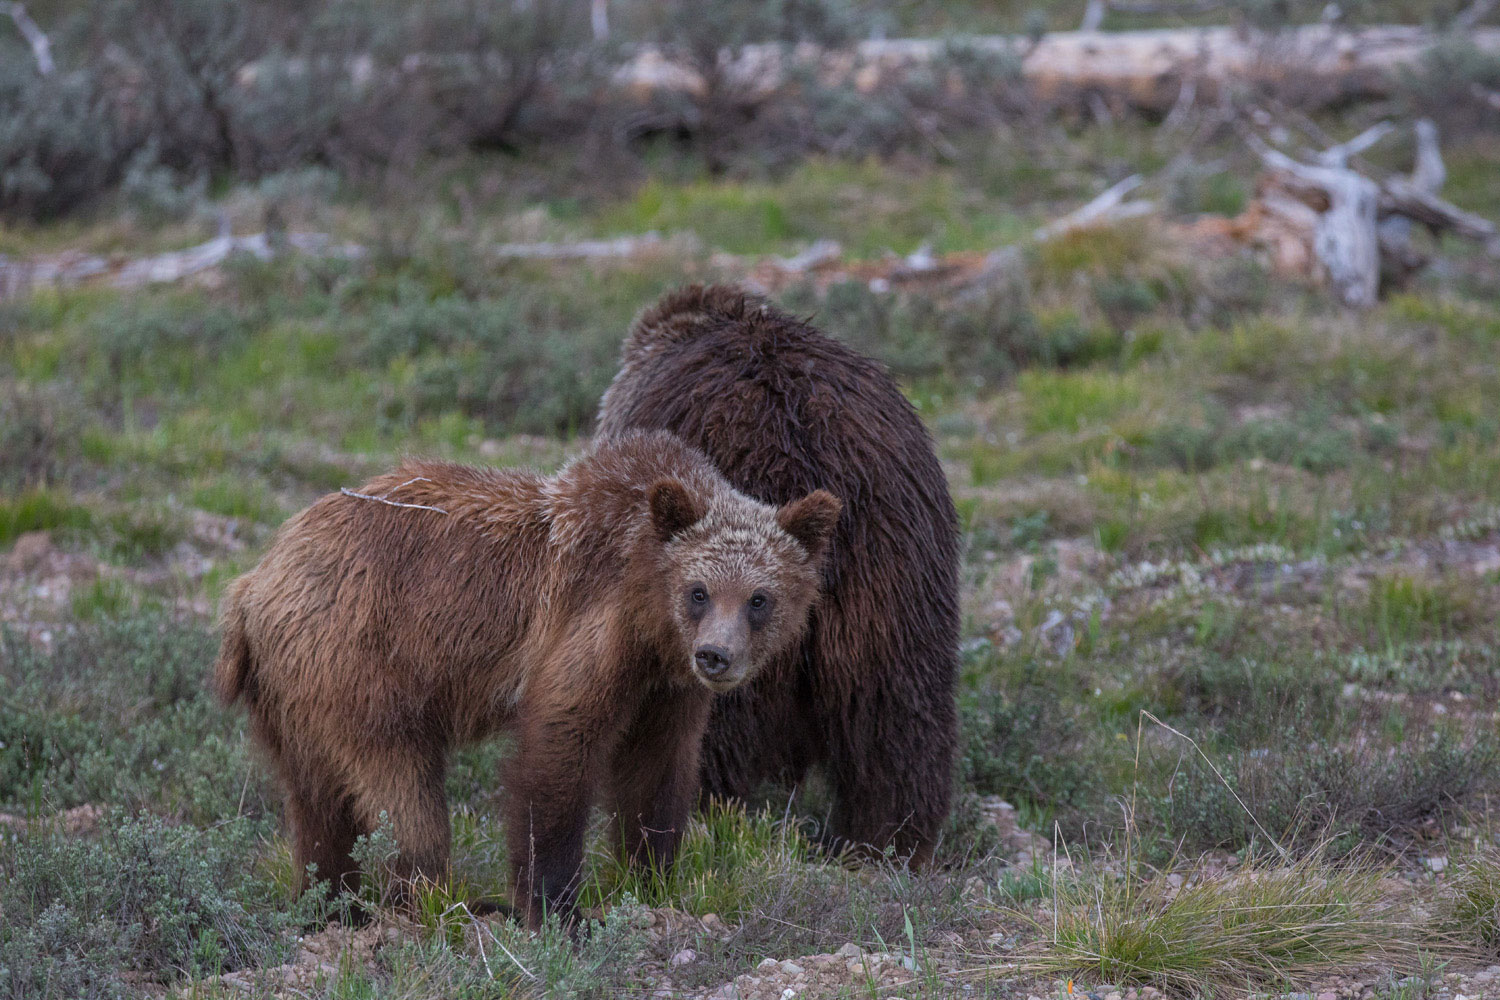 Grizzly 399 and one of her cubs forage on the emerging spring greens and roots of a meadow near their home on Pilgrim Creek.